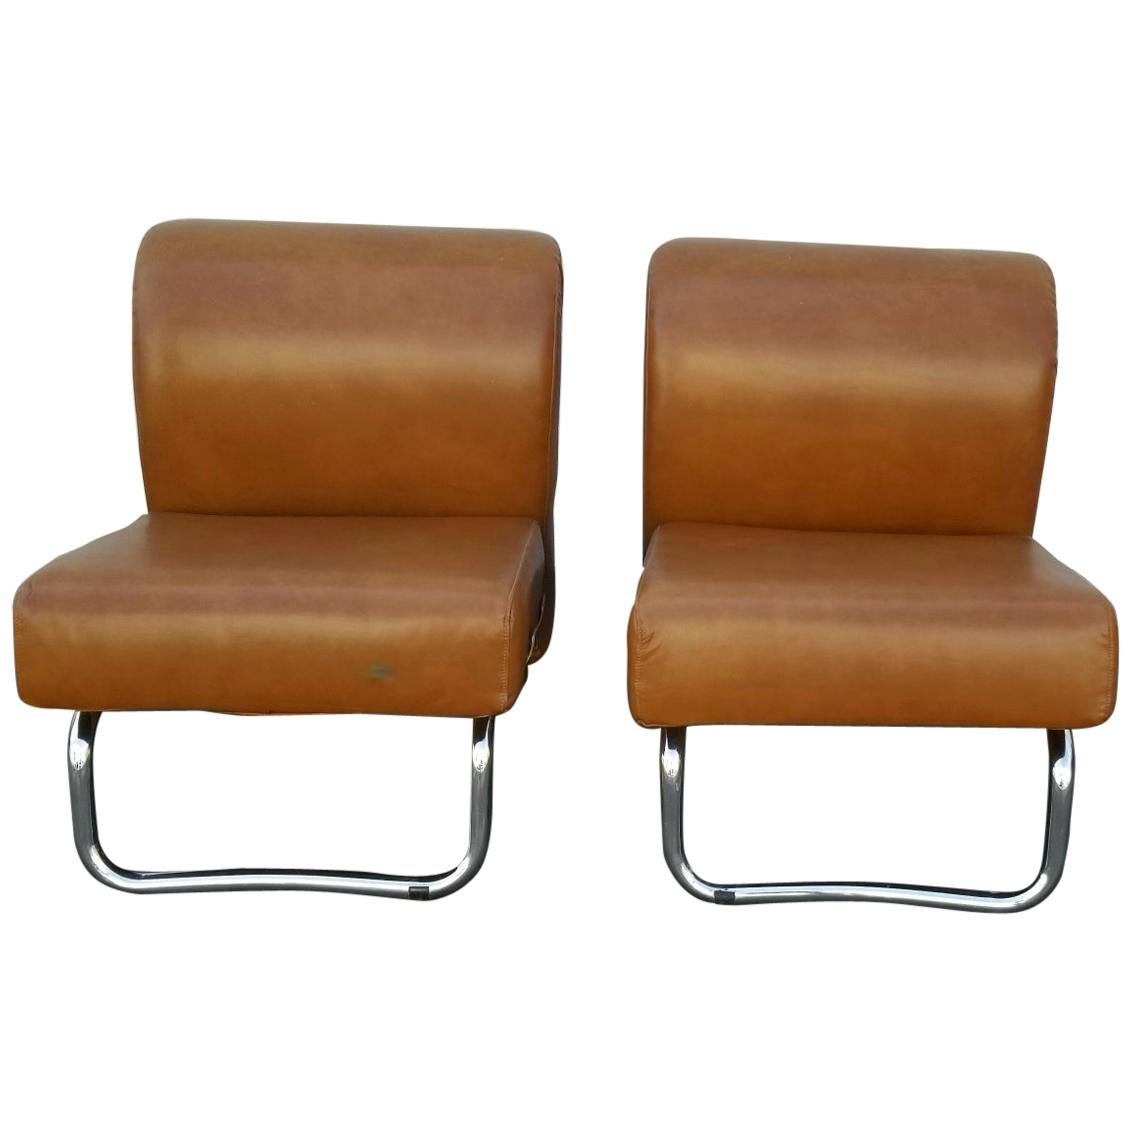 1970s Italian mid century pair of leather chairs. Brand new leather upholstery on the chrome base. Italian 
 design and comfortable seating is epithet of this chairs.
shipping to continental US in home delivery is $350